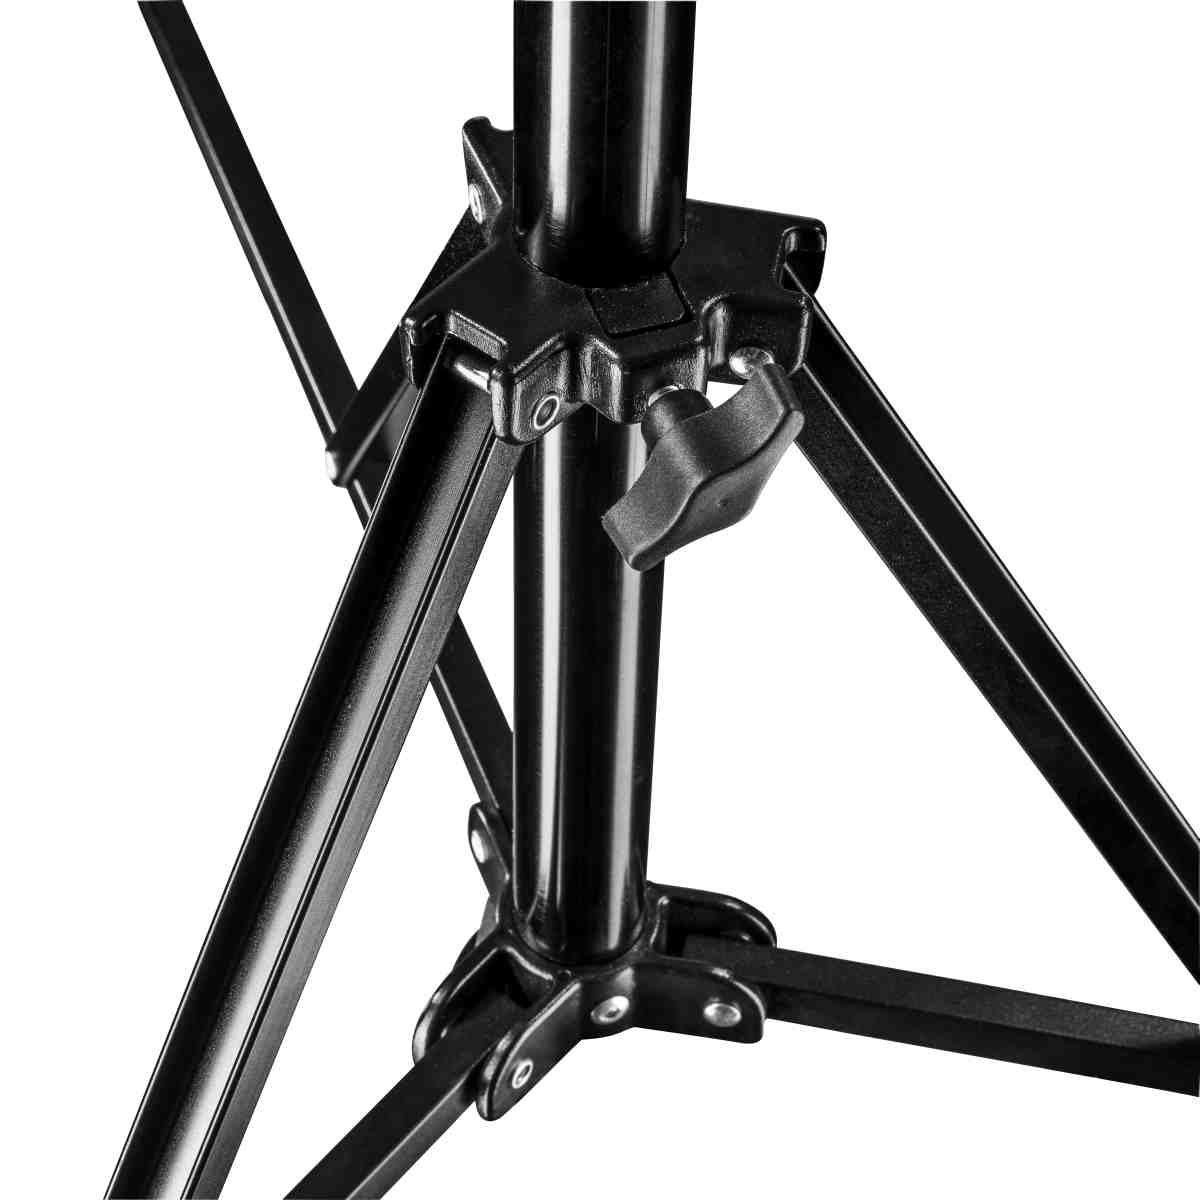 Walimex pro GN-806 Lamp stand 215cm